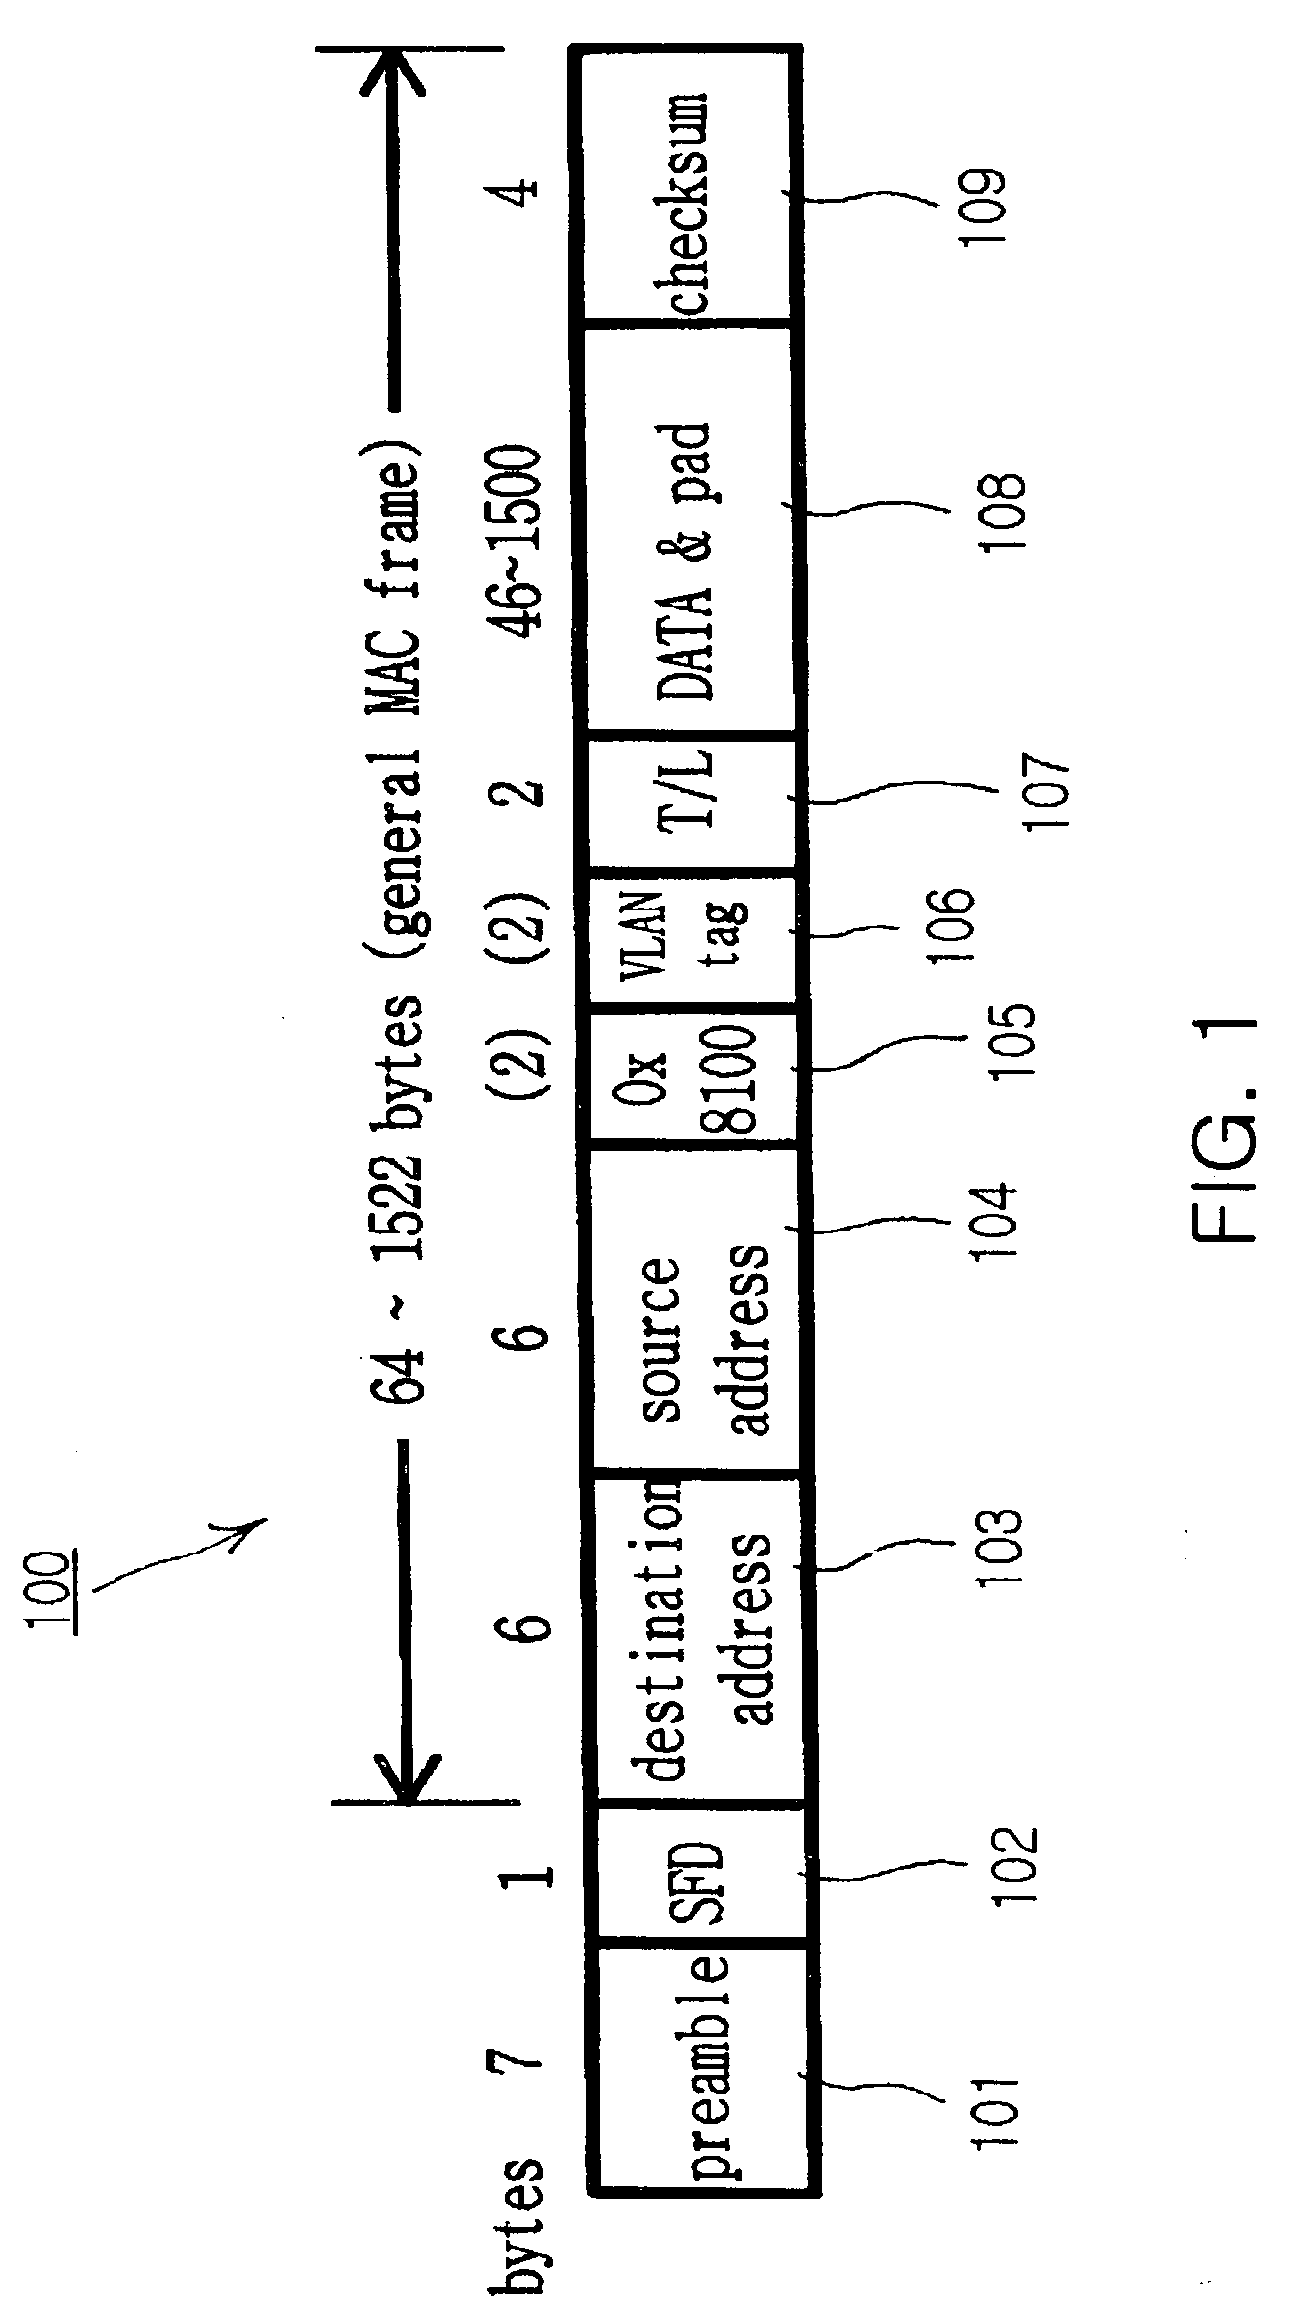 Ethernet switching apparatus and method using frame multiplexing and demultiplexing